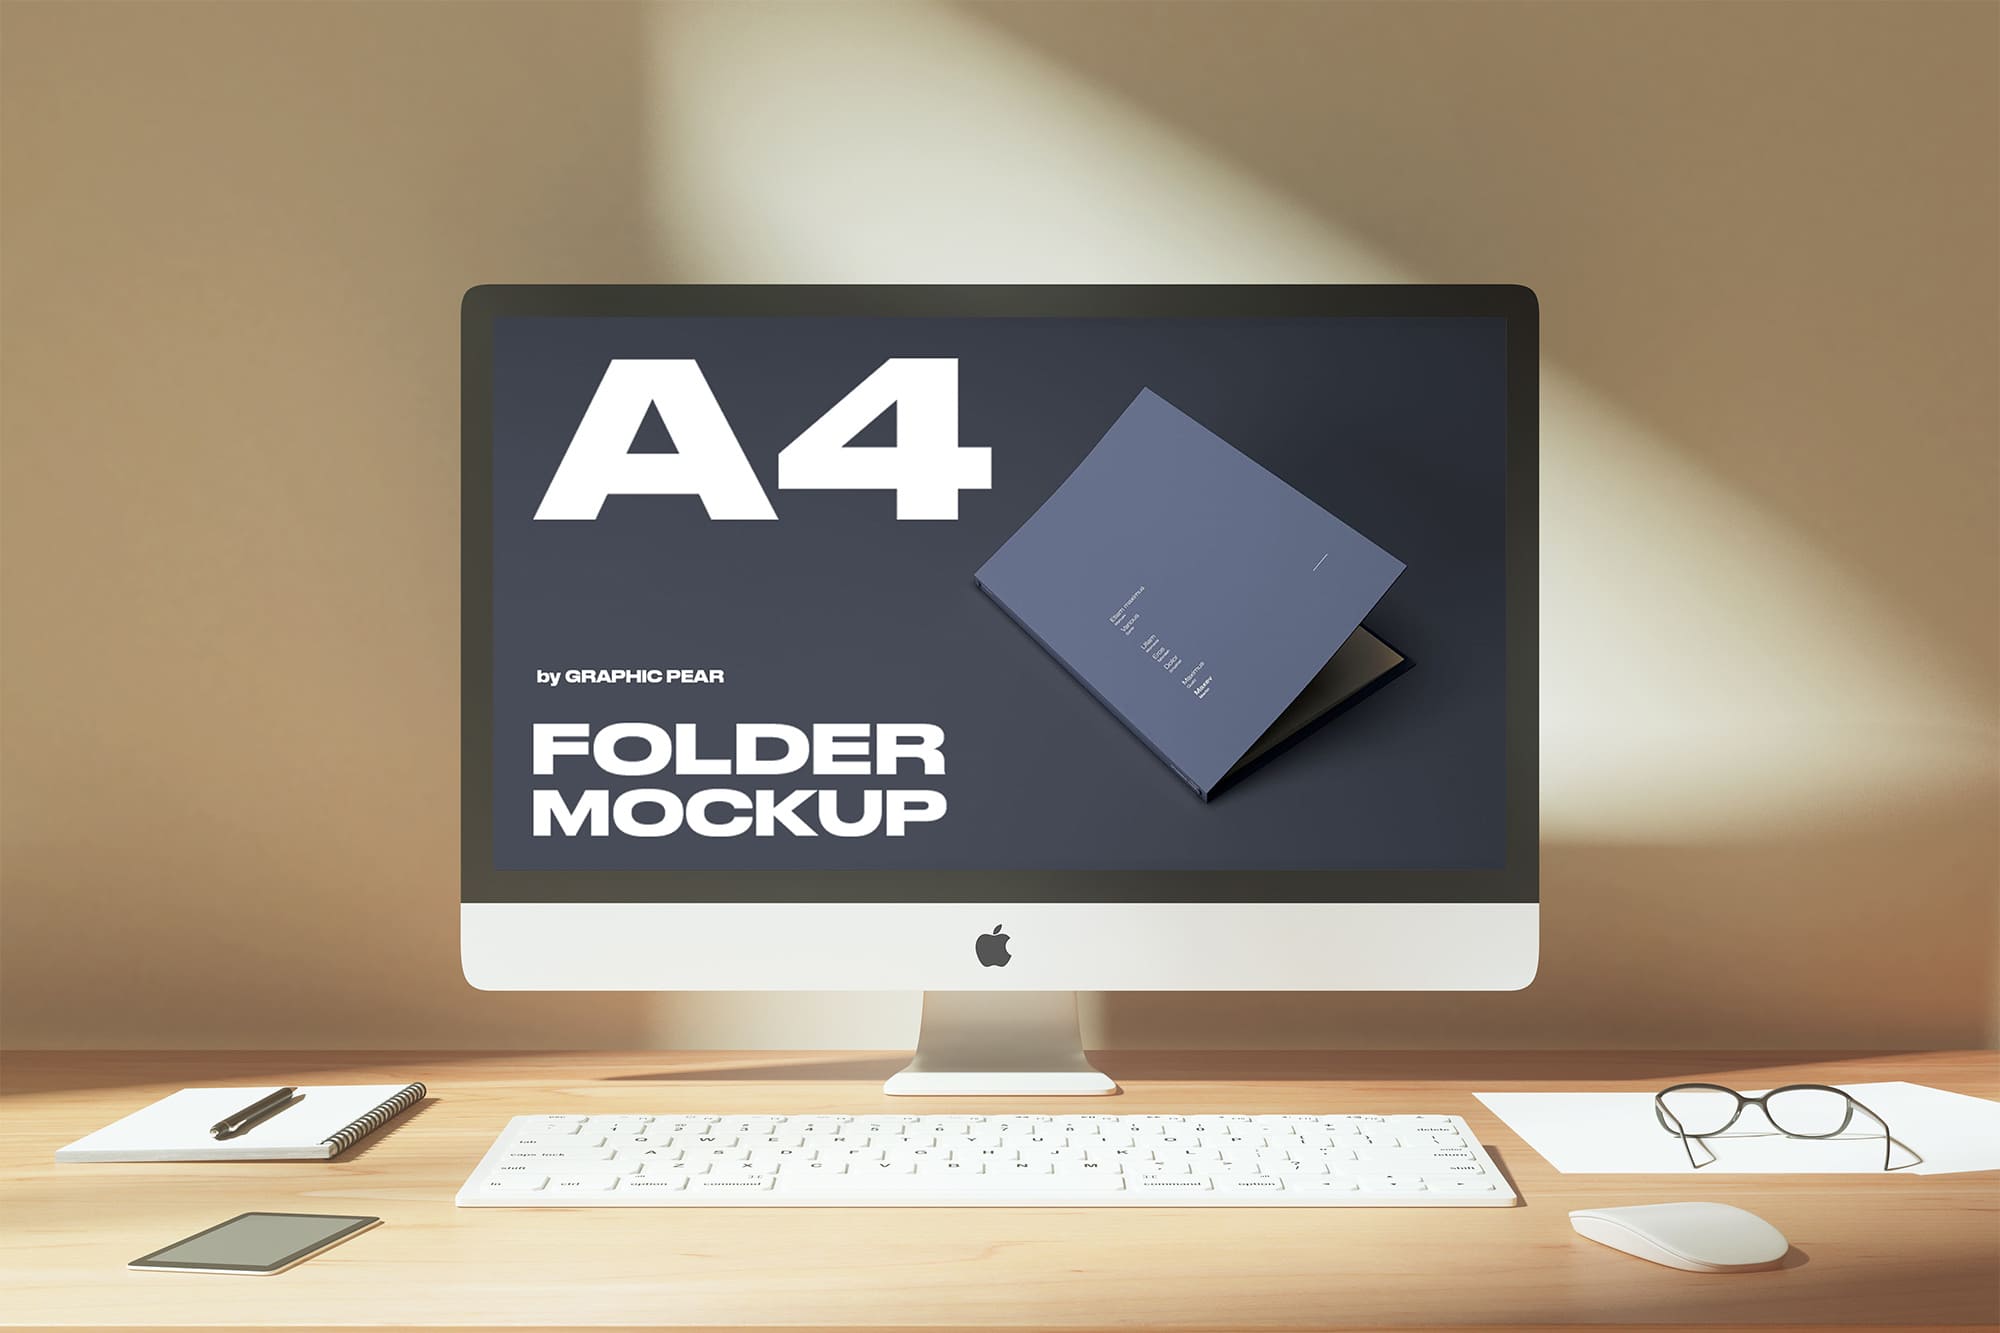 PC on screen with marvelous A4 folder mockup images.